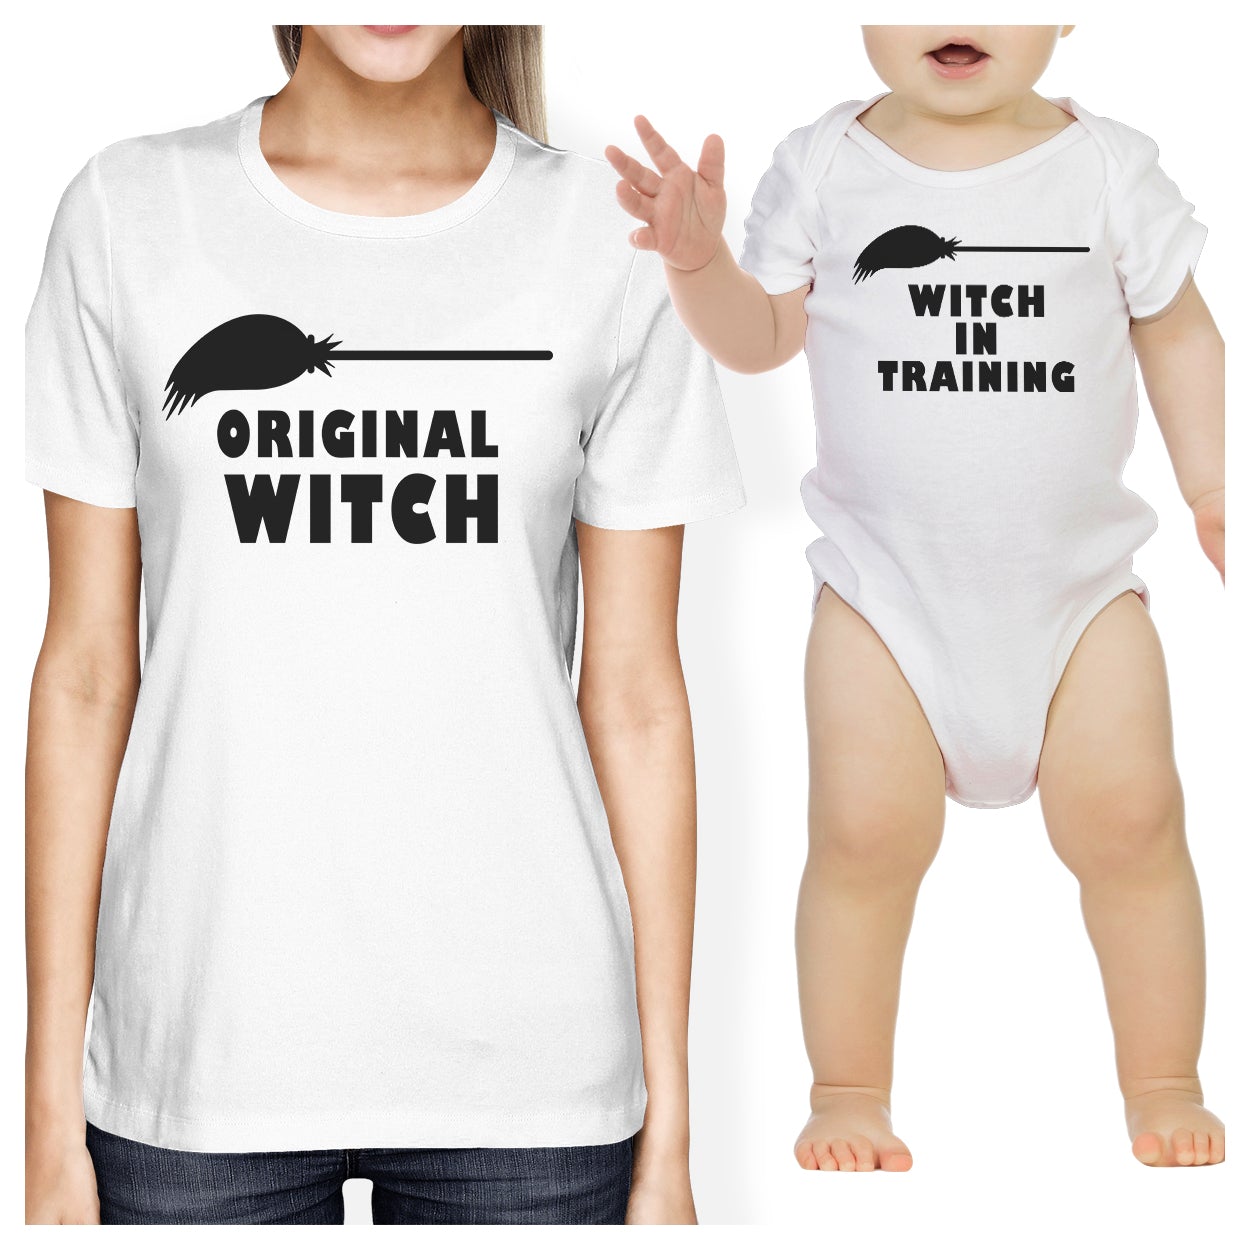 Original Witch And Witch In Training Mom and Baby Matching White Shirts